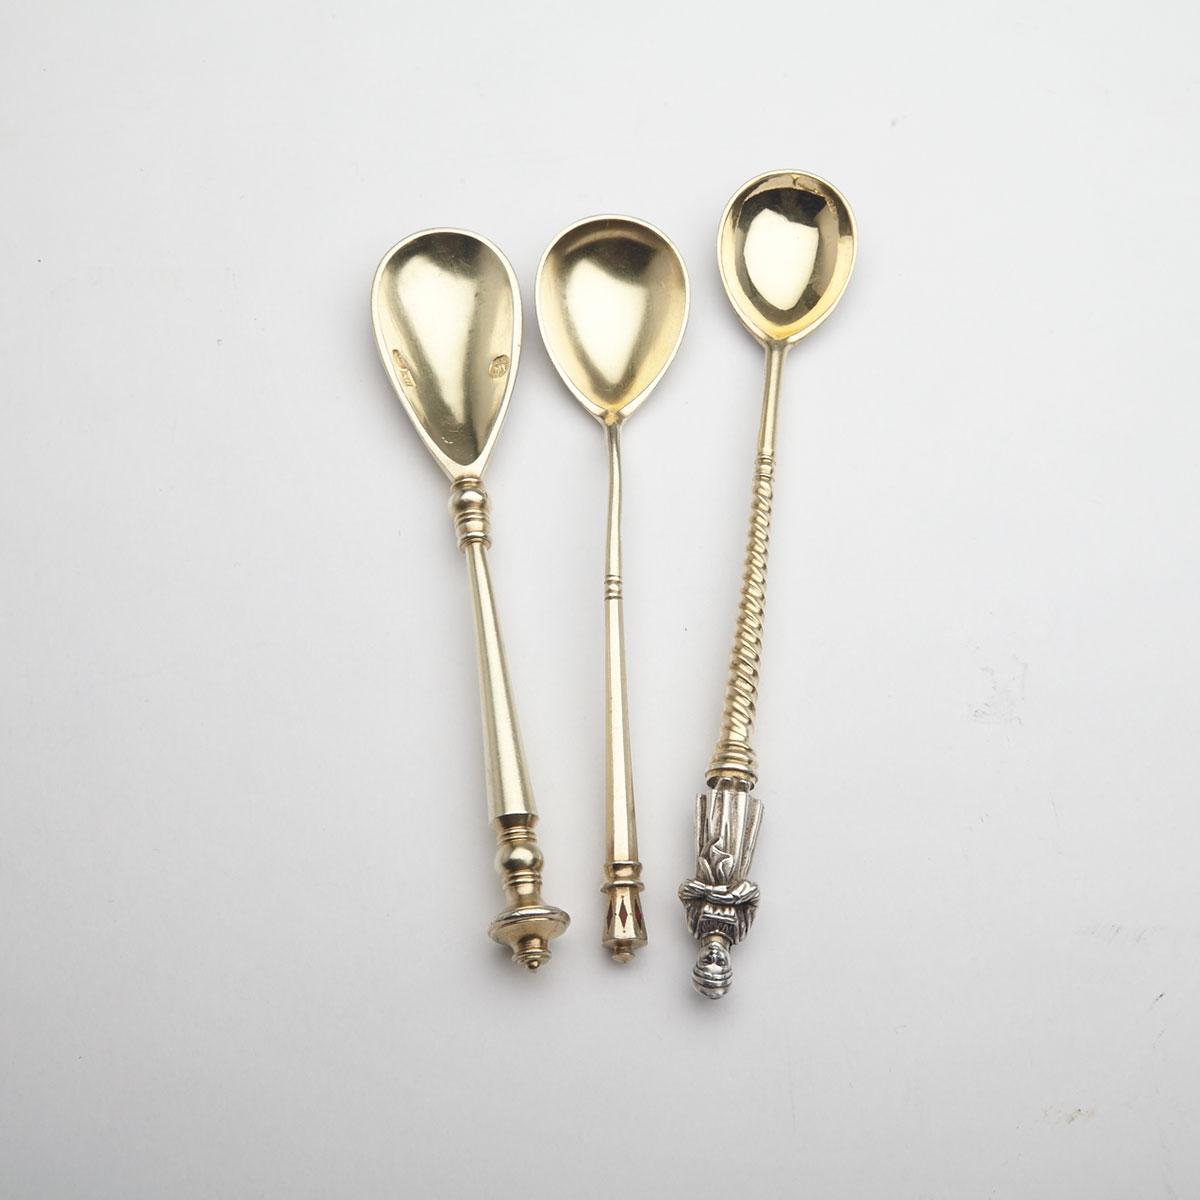 Three Russian Silver-Gilt and Champlevé Enamel Spoons, various makers, late 19th century